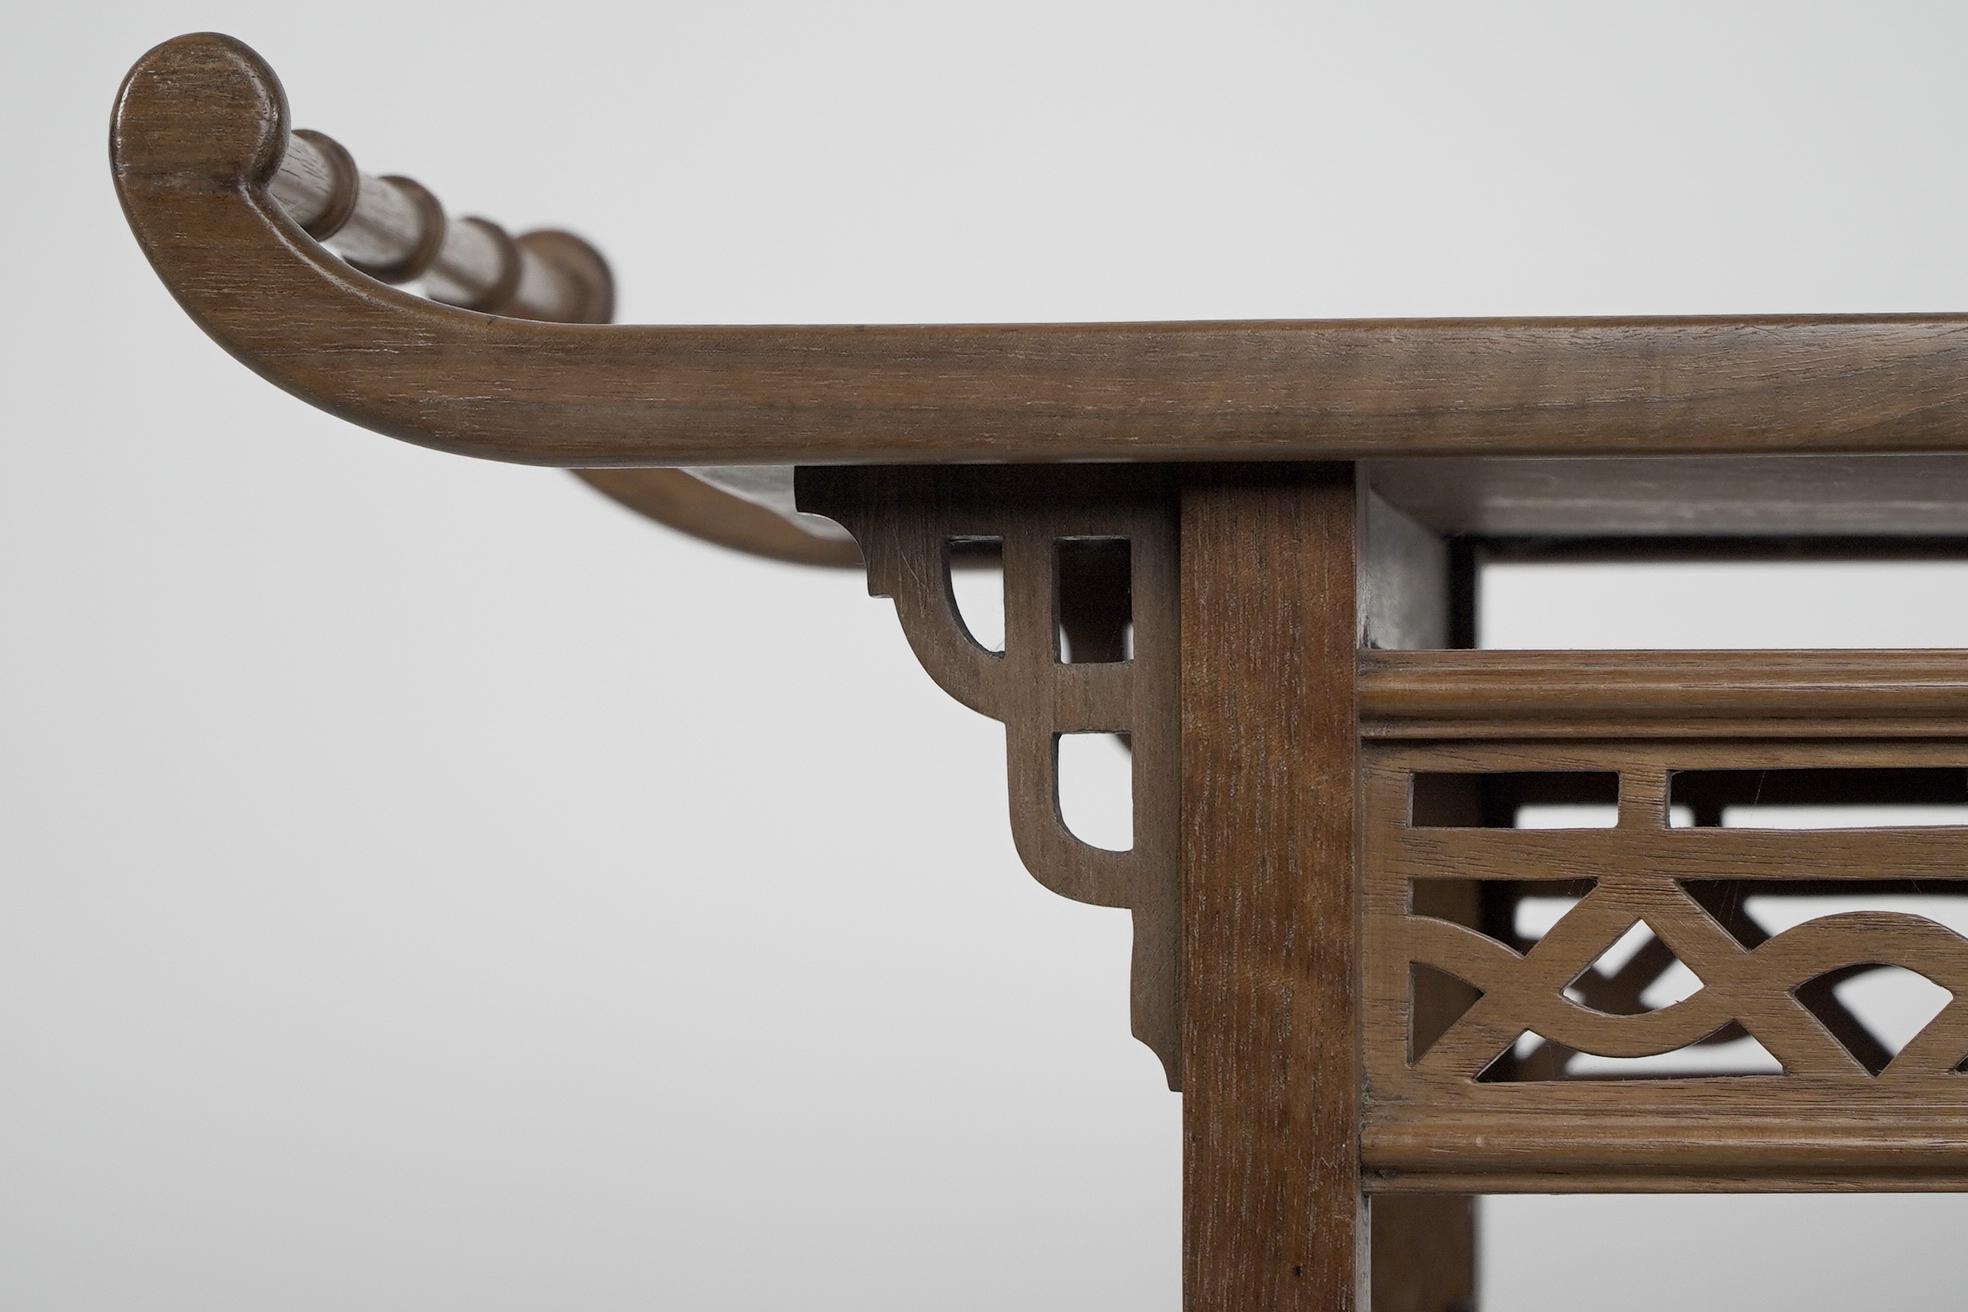 An Anglo-Japanese beech wood side table with fretwork &pagoda style turned rails For Sale 4